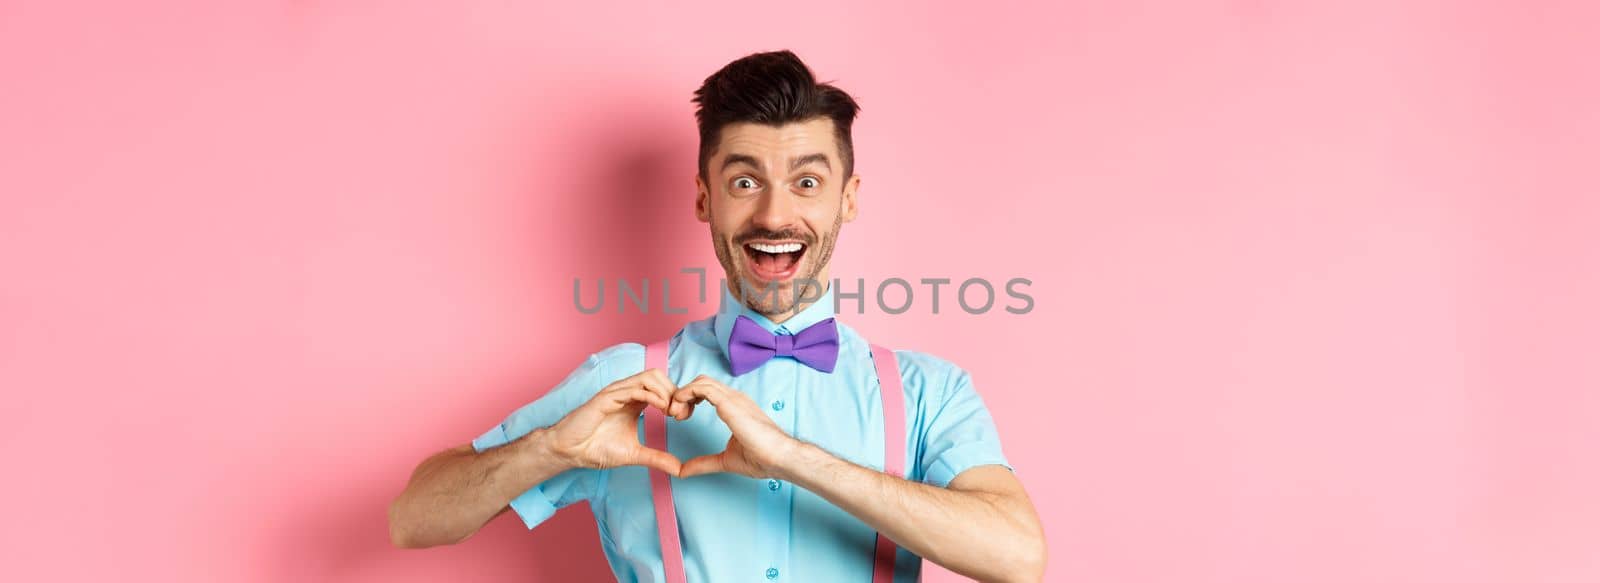 Excited smiling man showing pounding heart and looking with love, standing over romantic pink background. Valentines day concept.